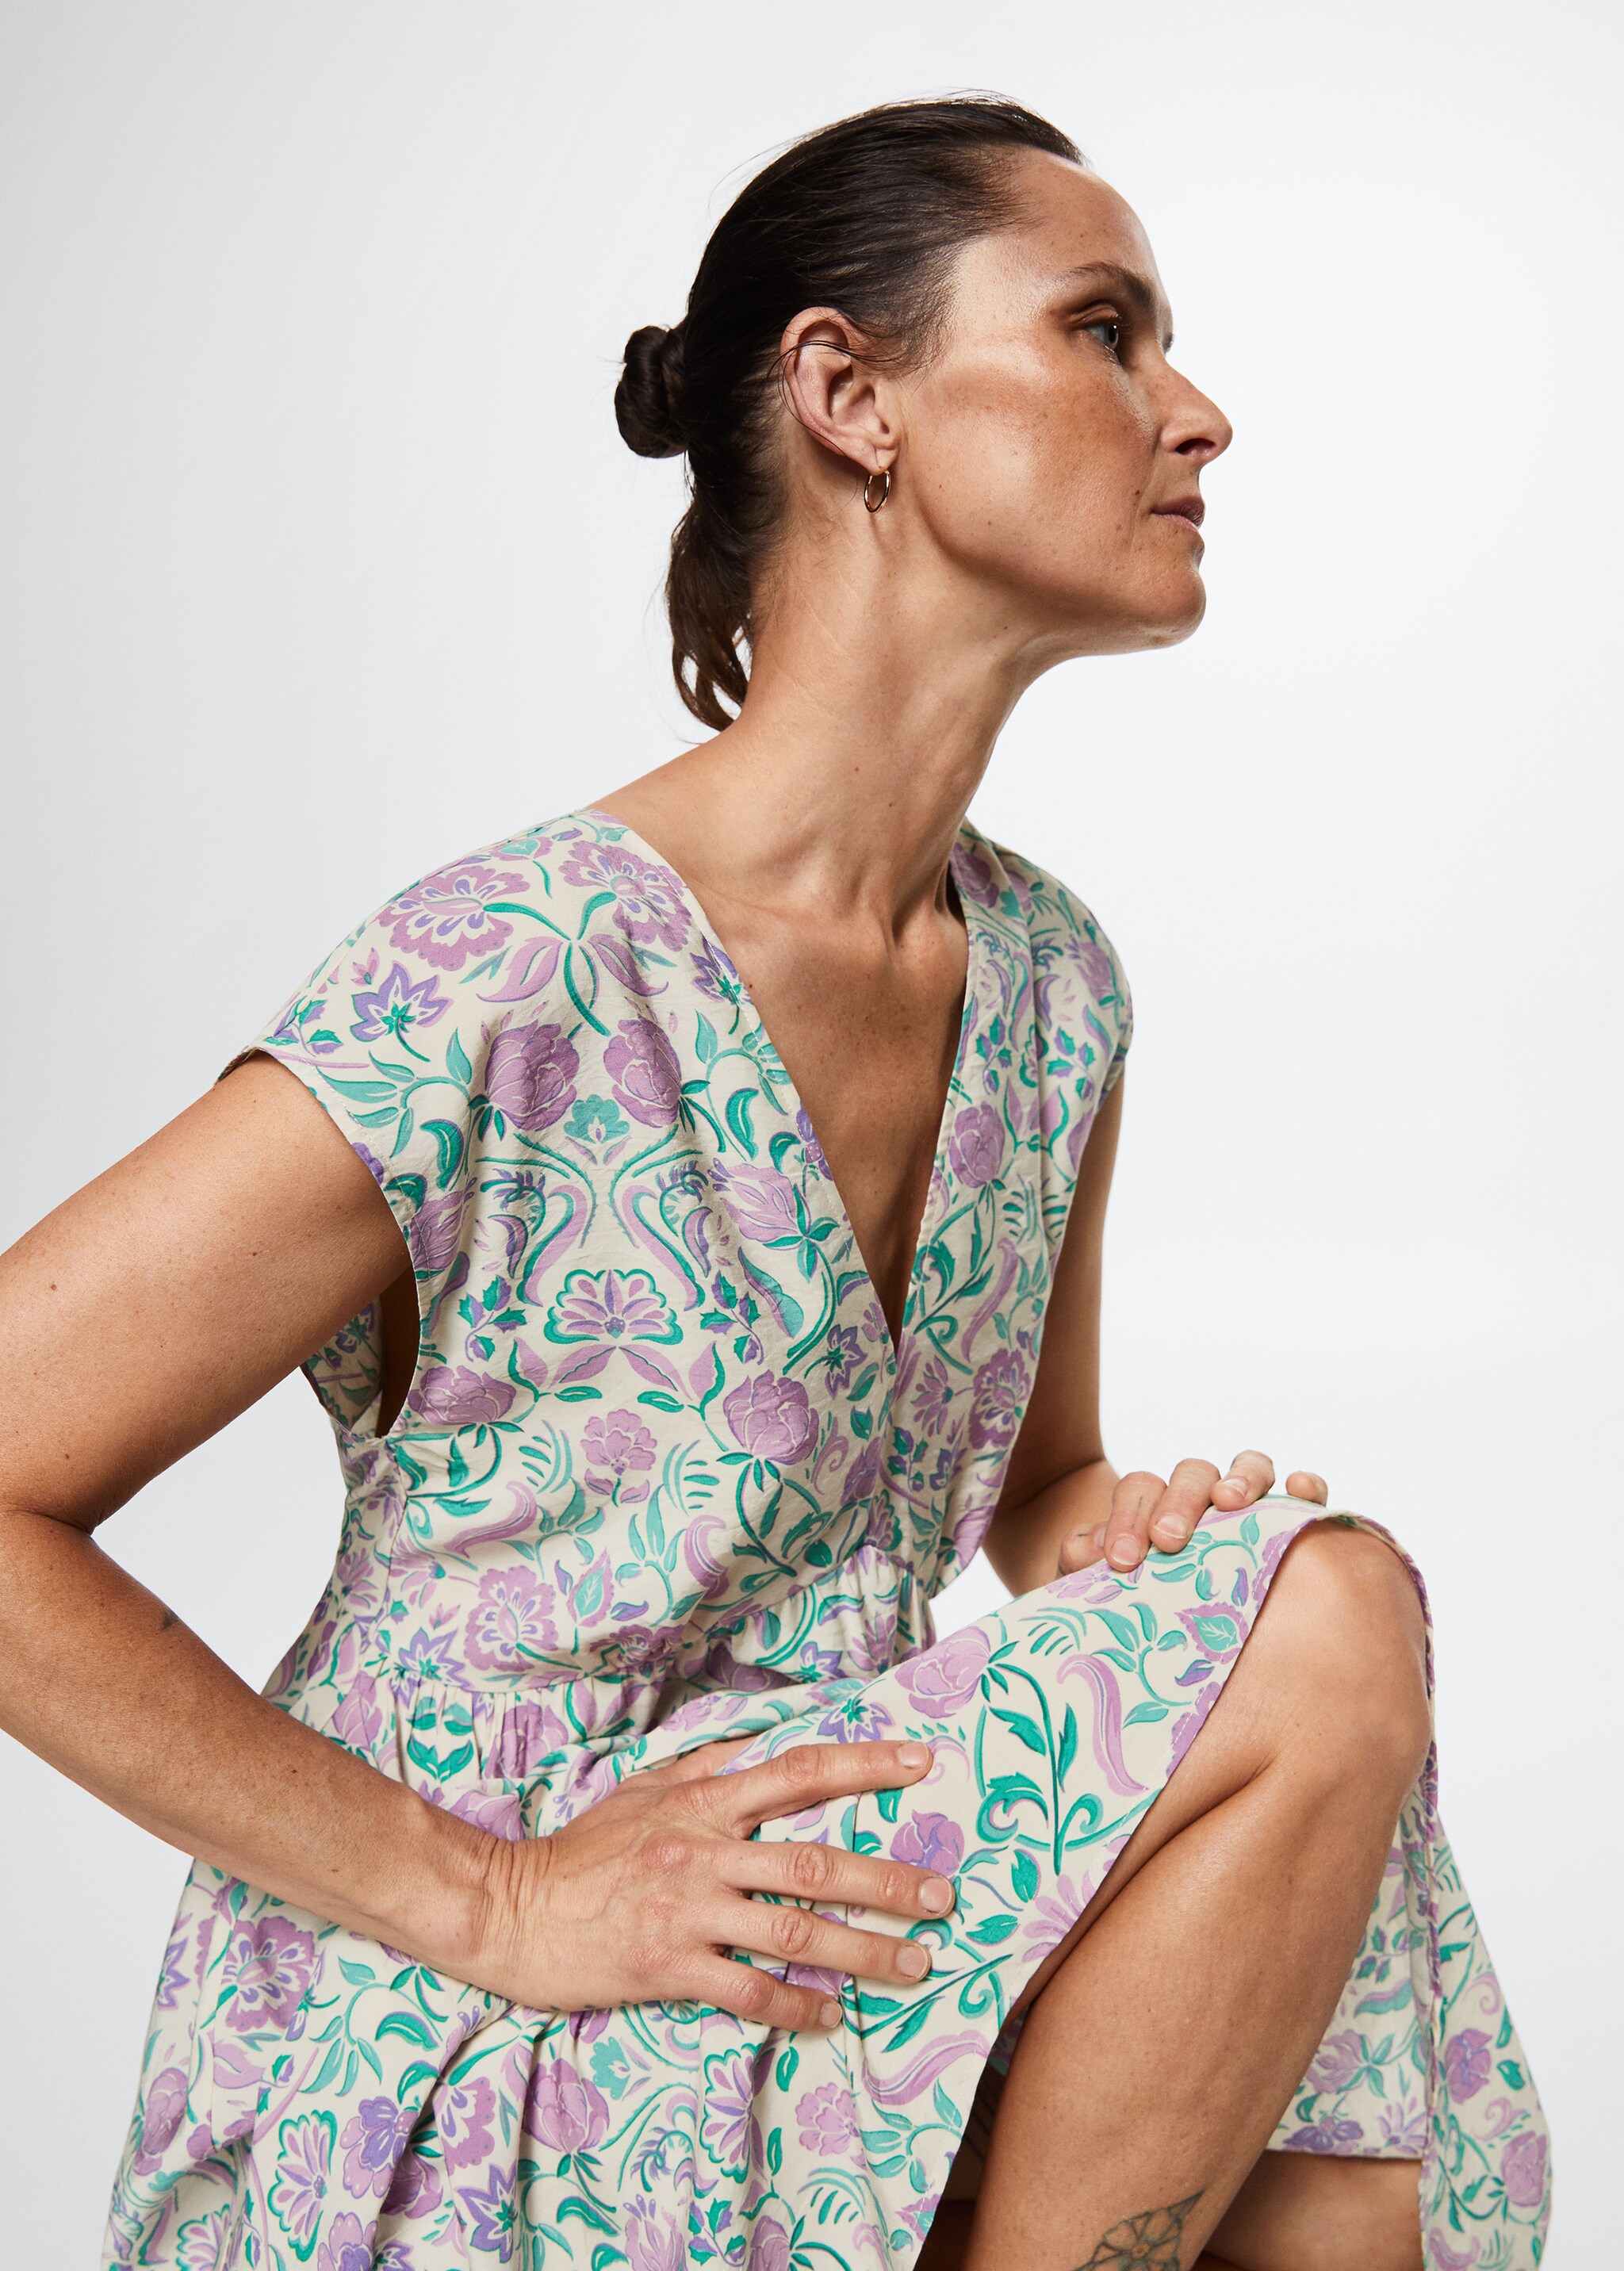 Flowy flower printed dress - Details of the article 2